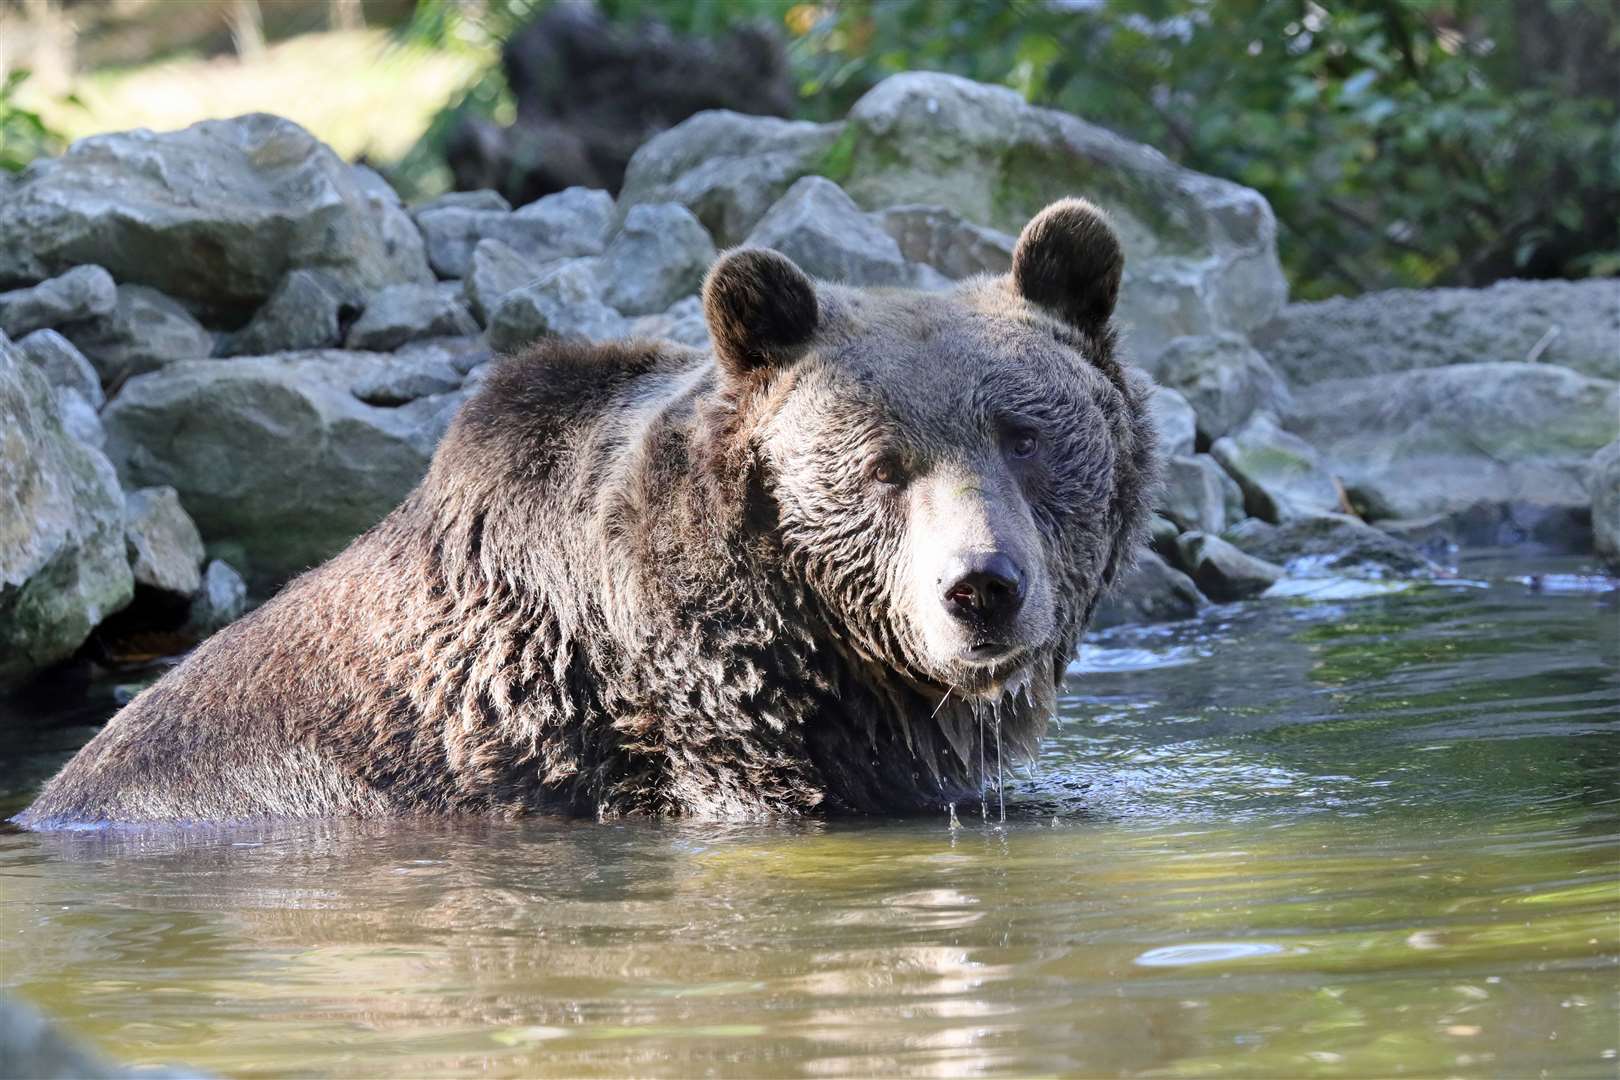 One of the bears takes a dip at Wildwood which has been ranked highly for its eco-friendly credentials